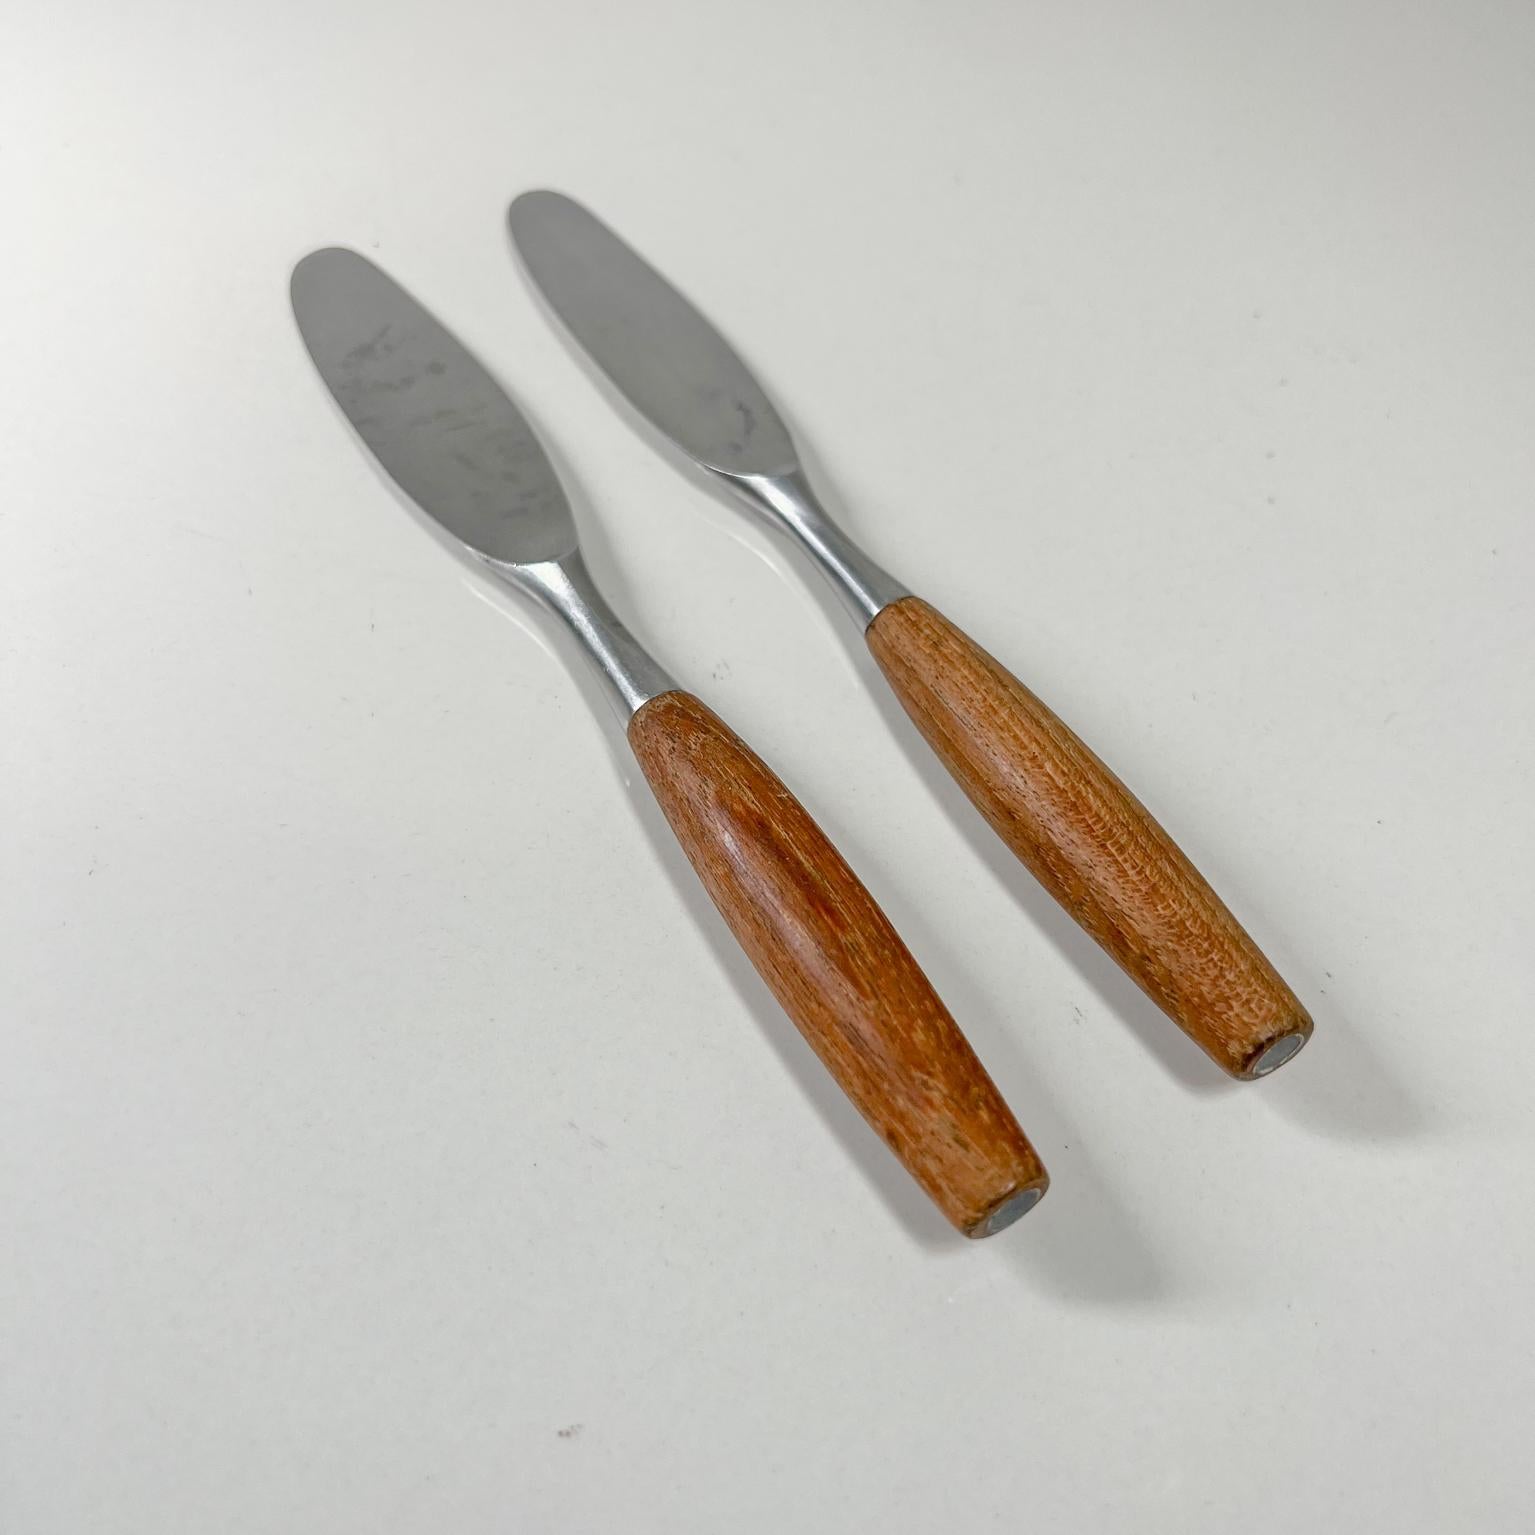 Dansk made in Germany
Dansk IHQ Germany set of 2 knives teak & stainless fjord flatware 1954
Made in Teak Wood and Stainless Steel Designed by Jens Quistgaard
Measures 8.38
Unrestored preowned original vintage condition.
See our images